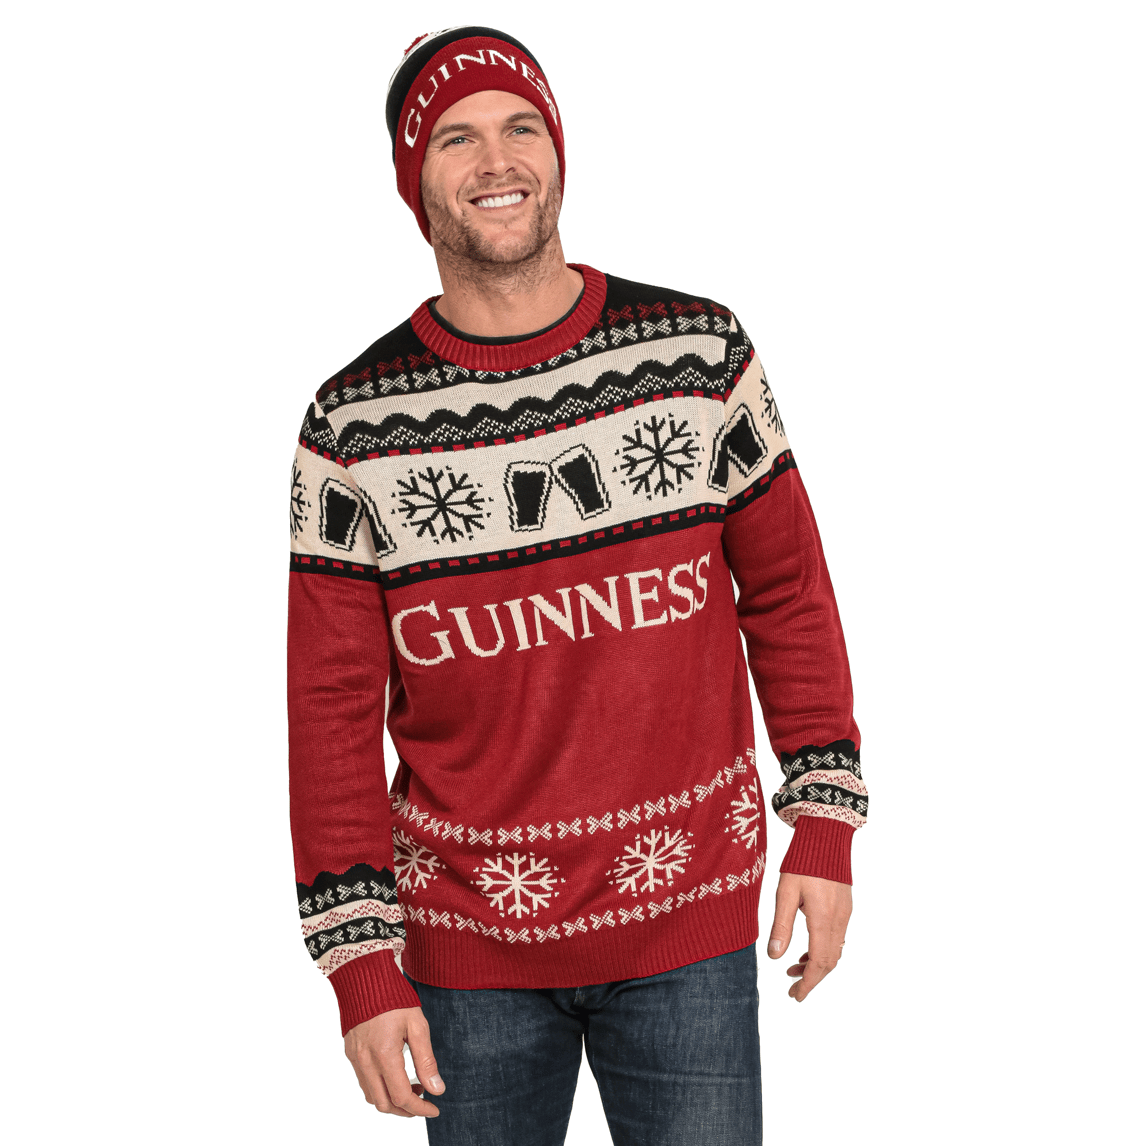 Keep warm and festive this Christmas season with the iconic Guinness UK men's Christmas sweater. Featuring snowflakes and a cozy Official Pint Winter Beanie hat design, this sweater will keep you looking stylish and ready.